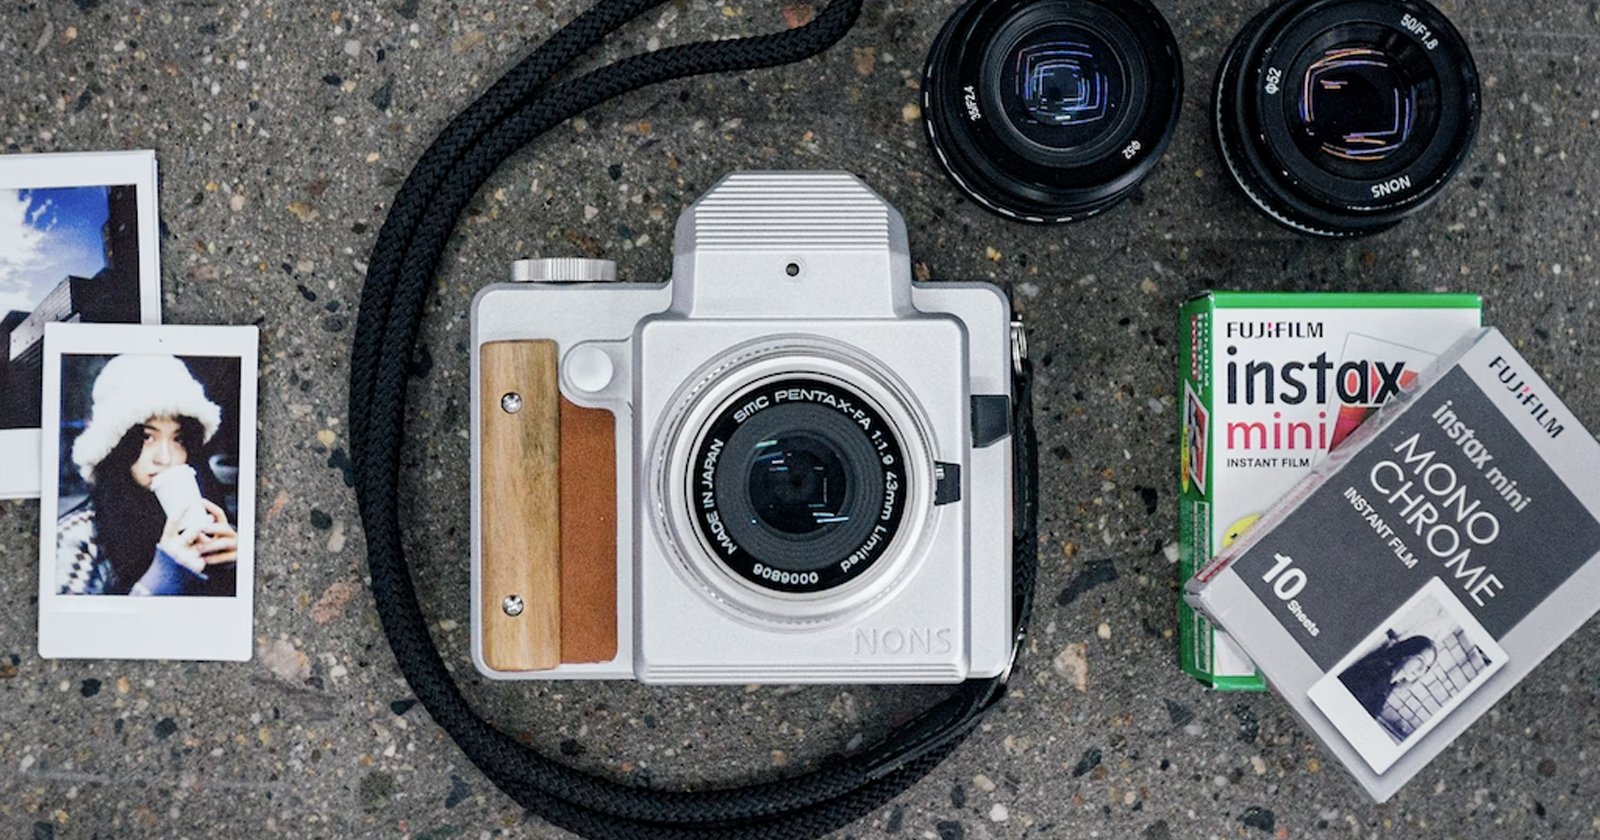 The Nons SL645 is an Interchangeable Lens SLR Instax Mini Film Camera